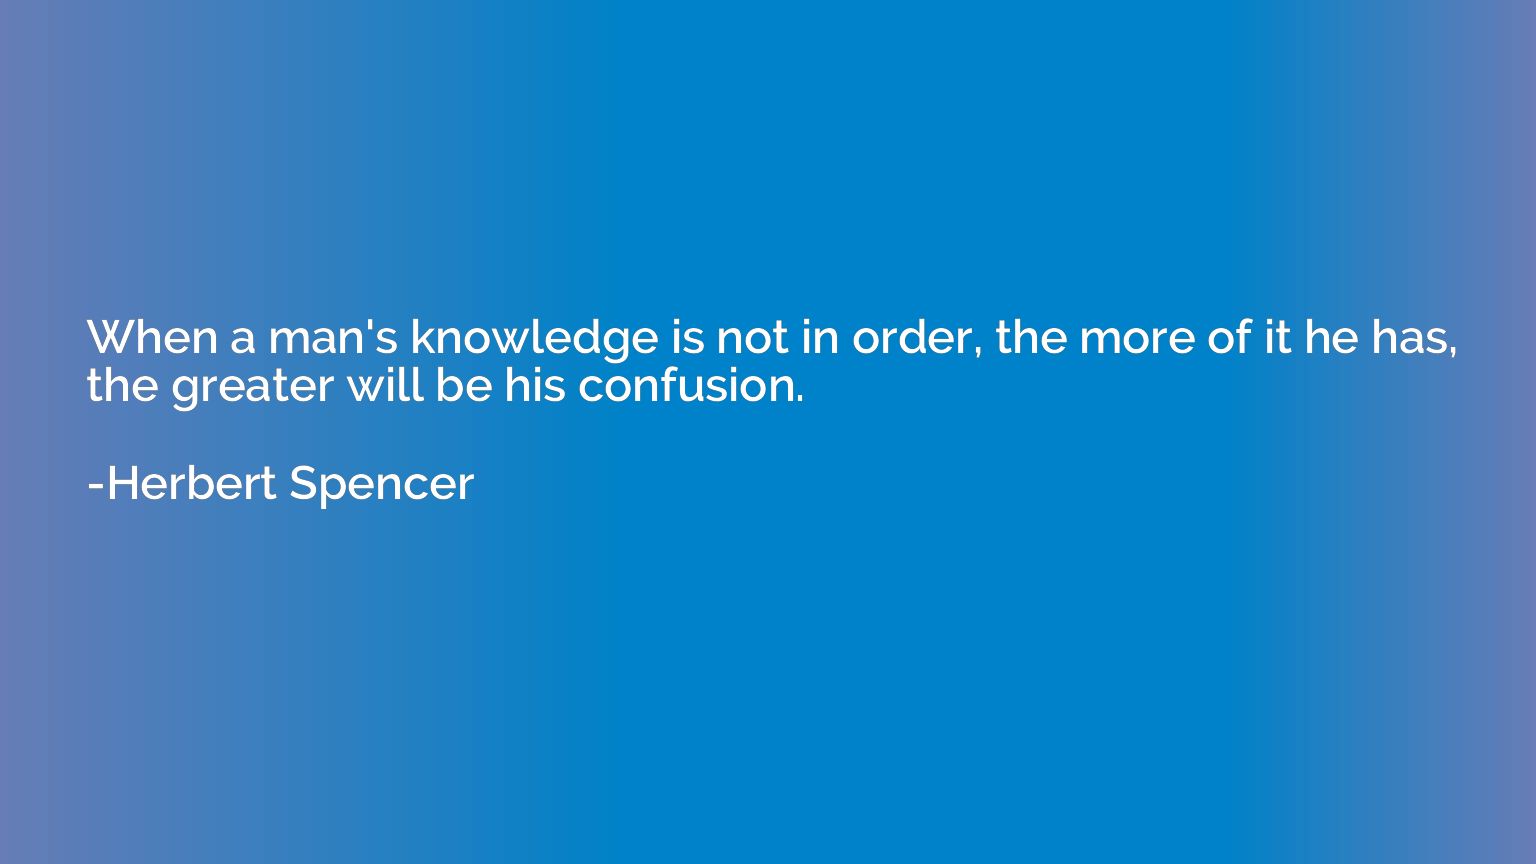 When a man's knowledge is not in order, the more of it he ha